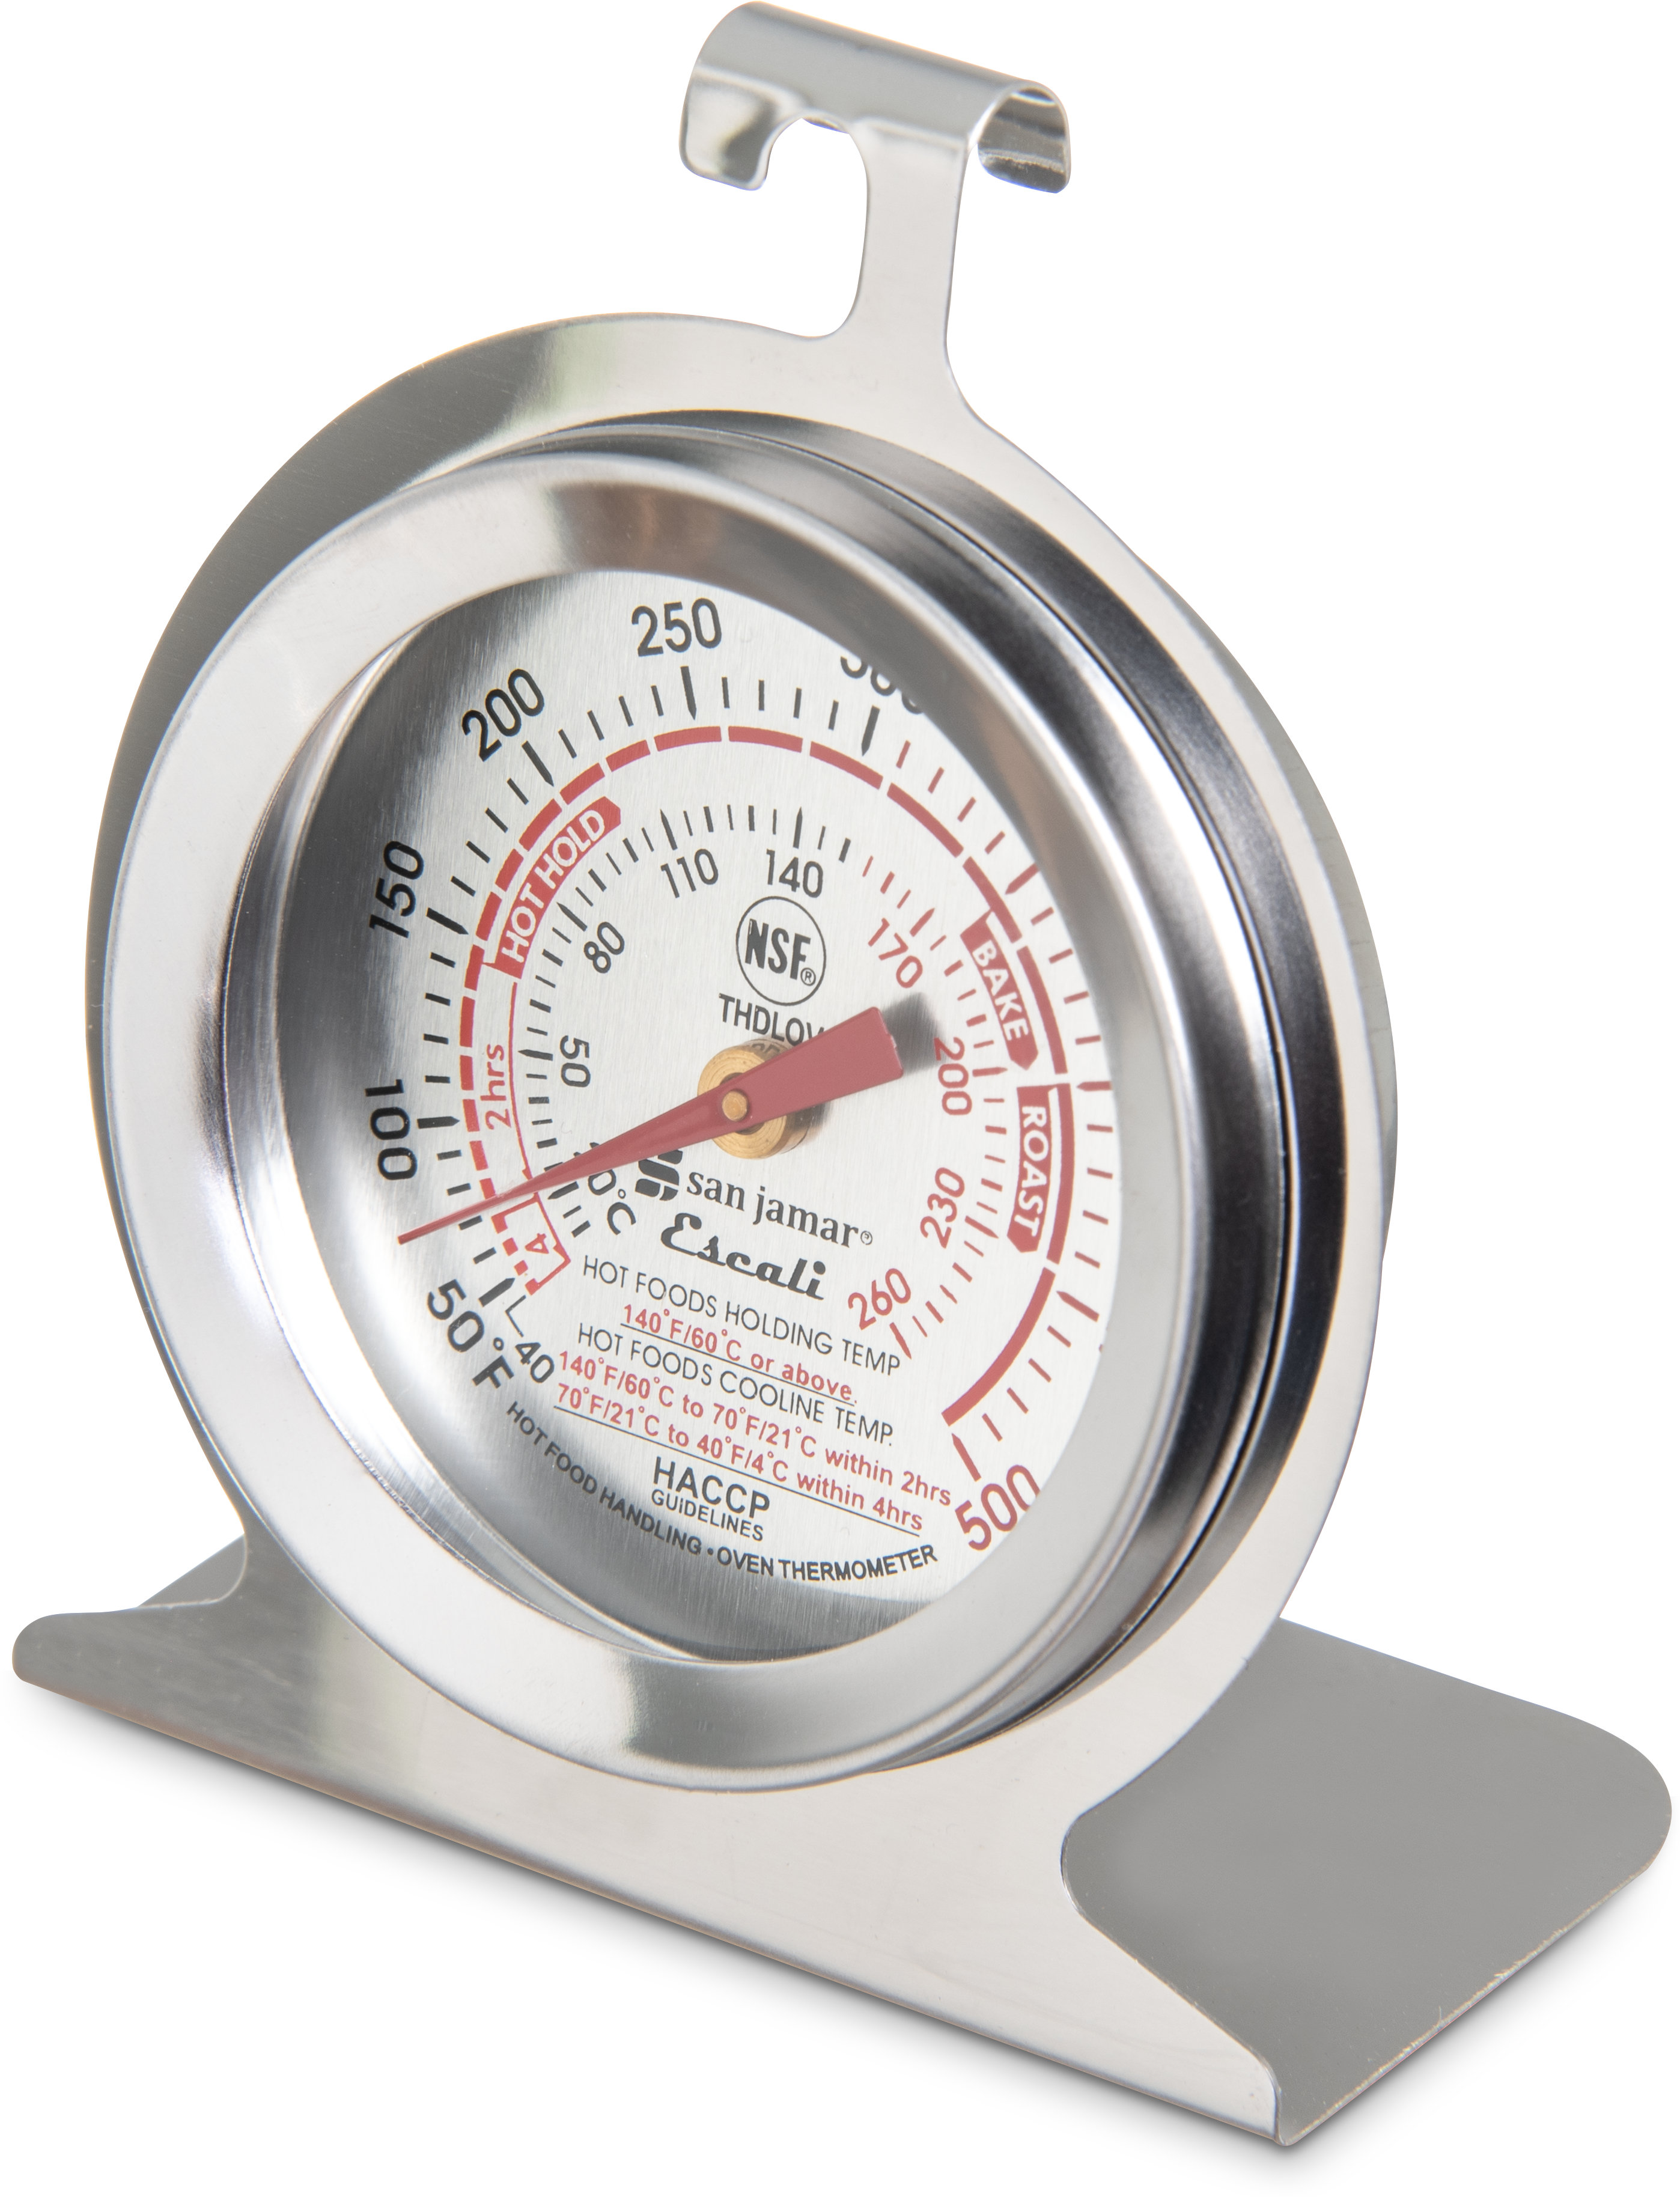 Taylor 5932 Large Dial Kitchen Cooking Oven Thermometer, 3.25 Inch